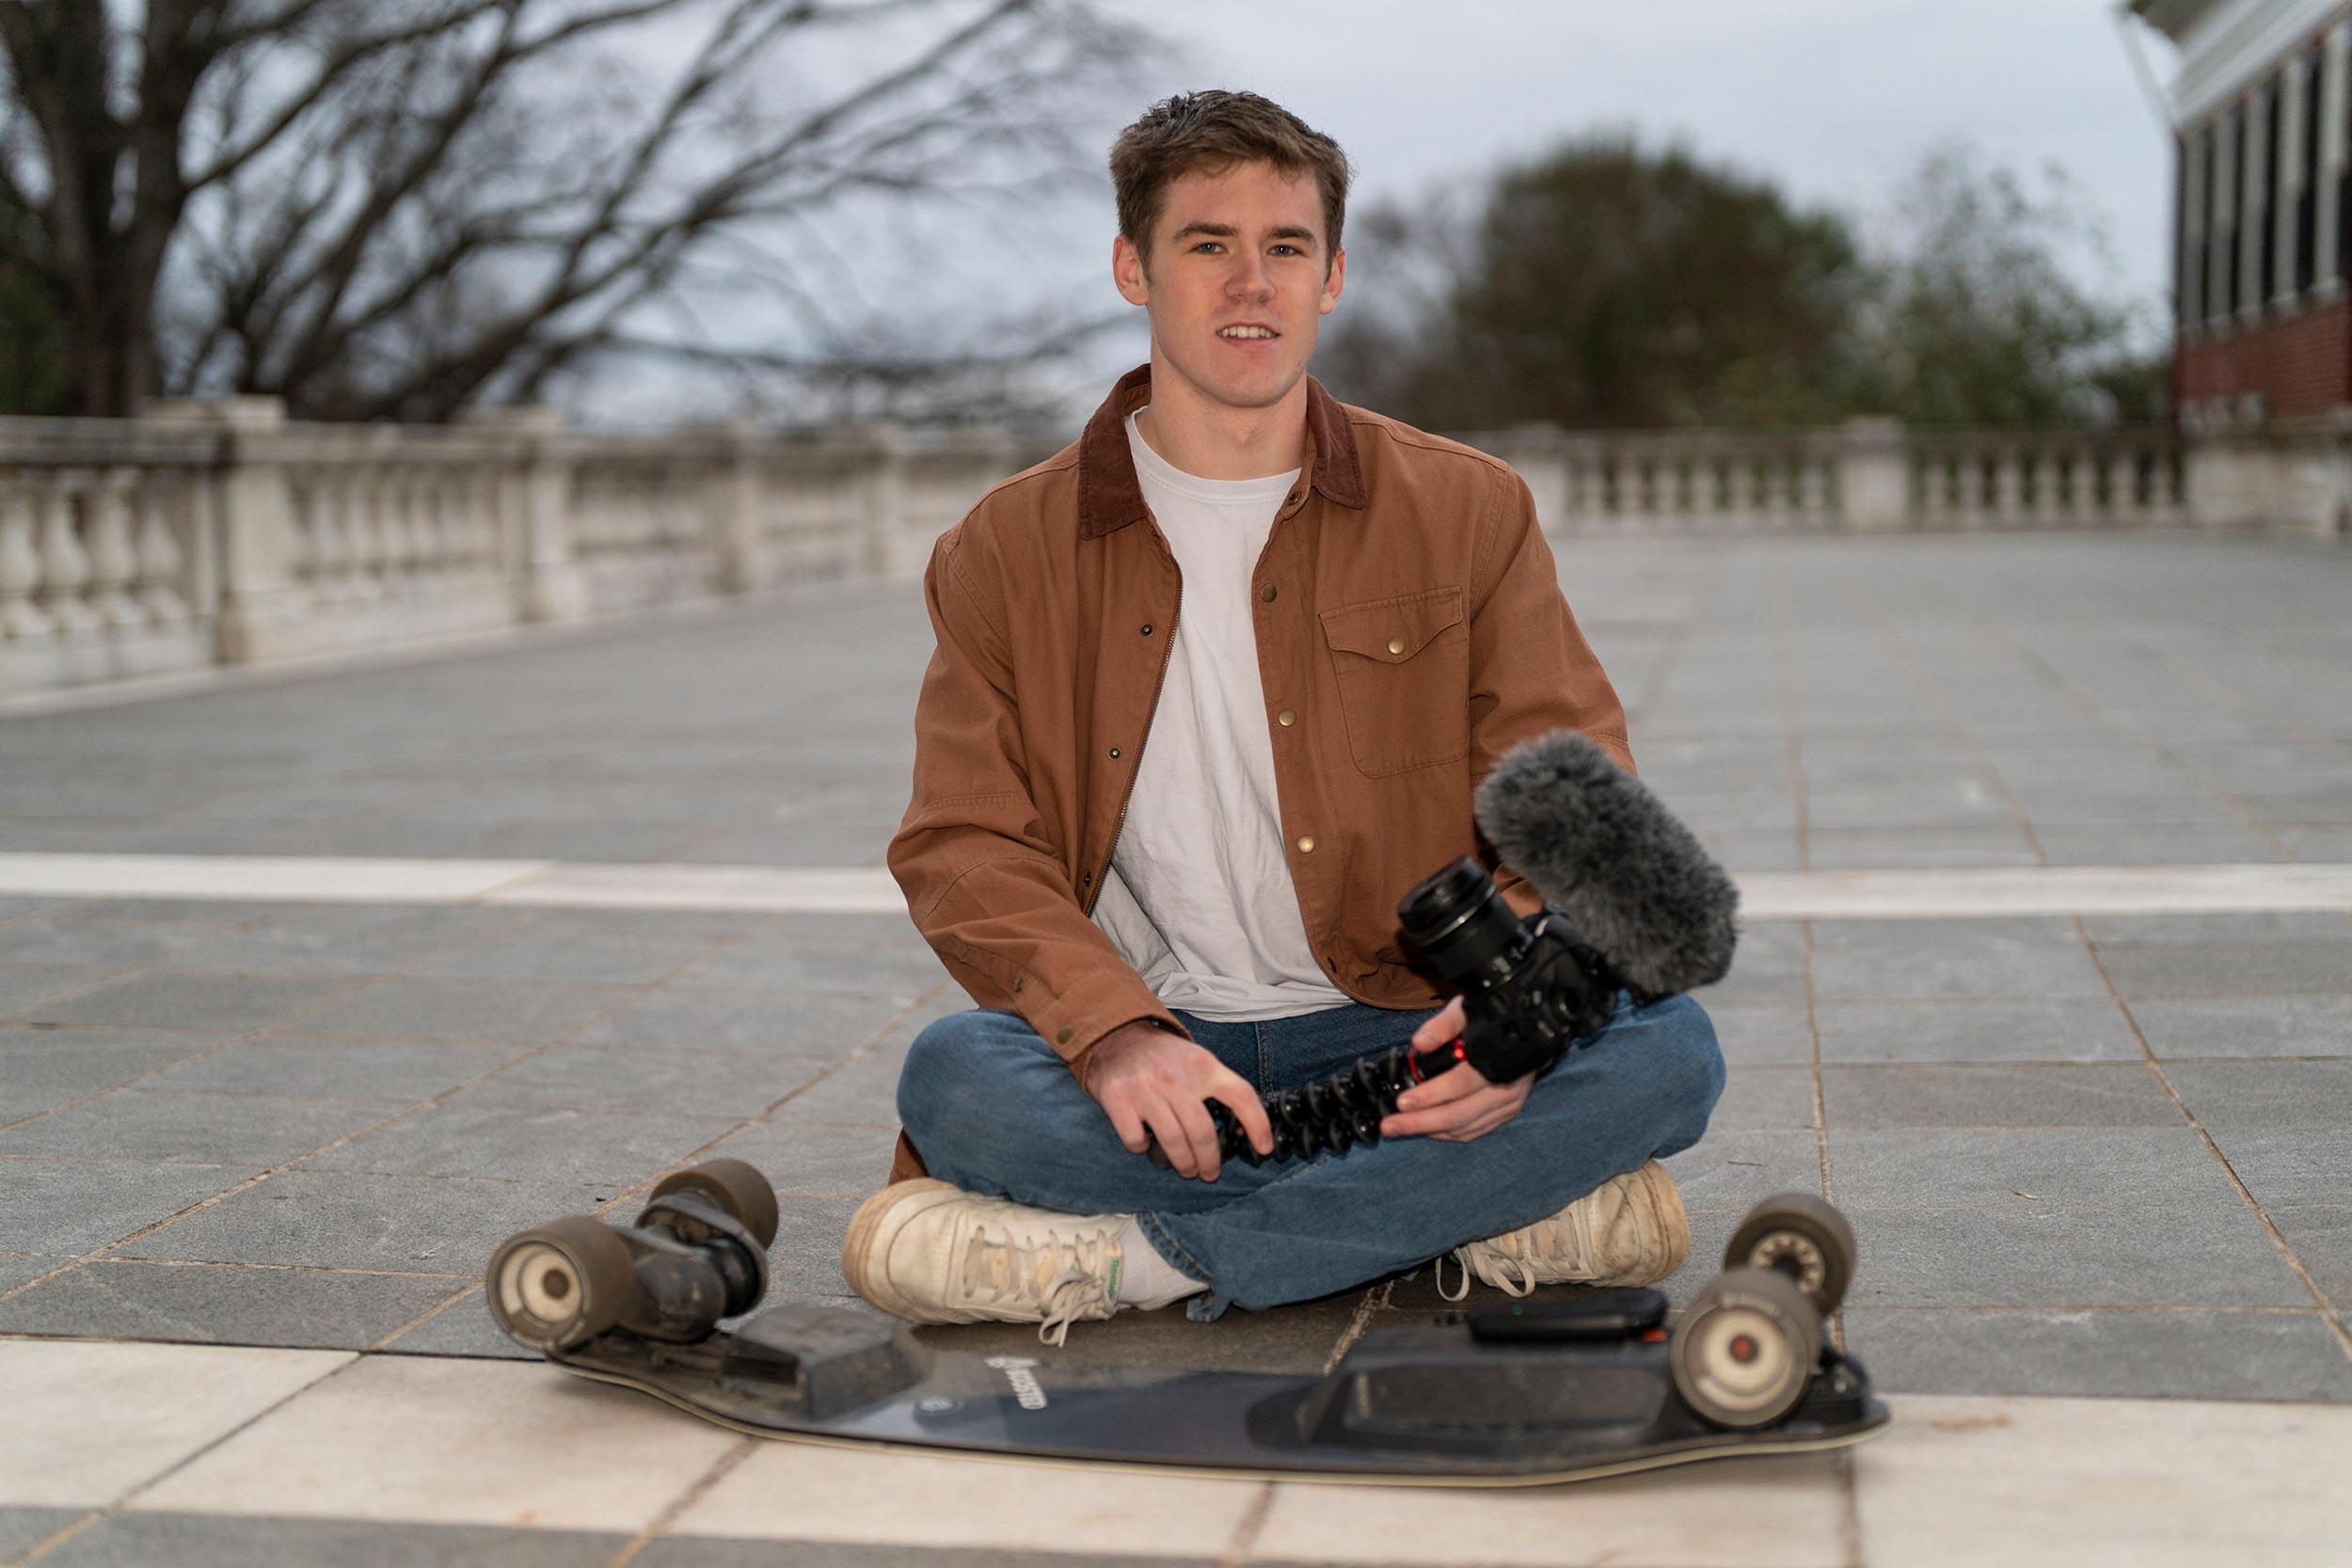 Portrait of Sam White with his skateboard on grounds